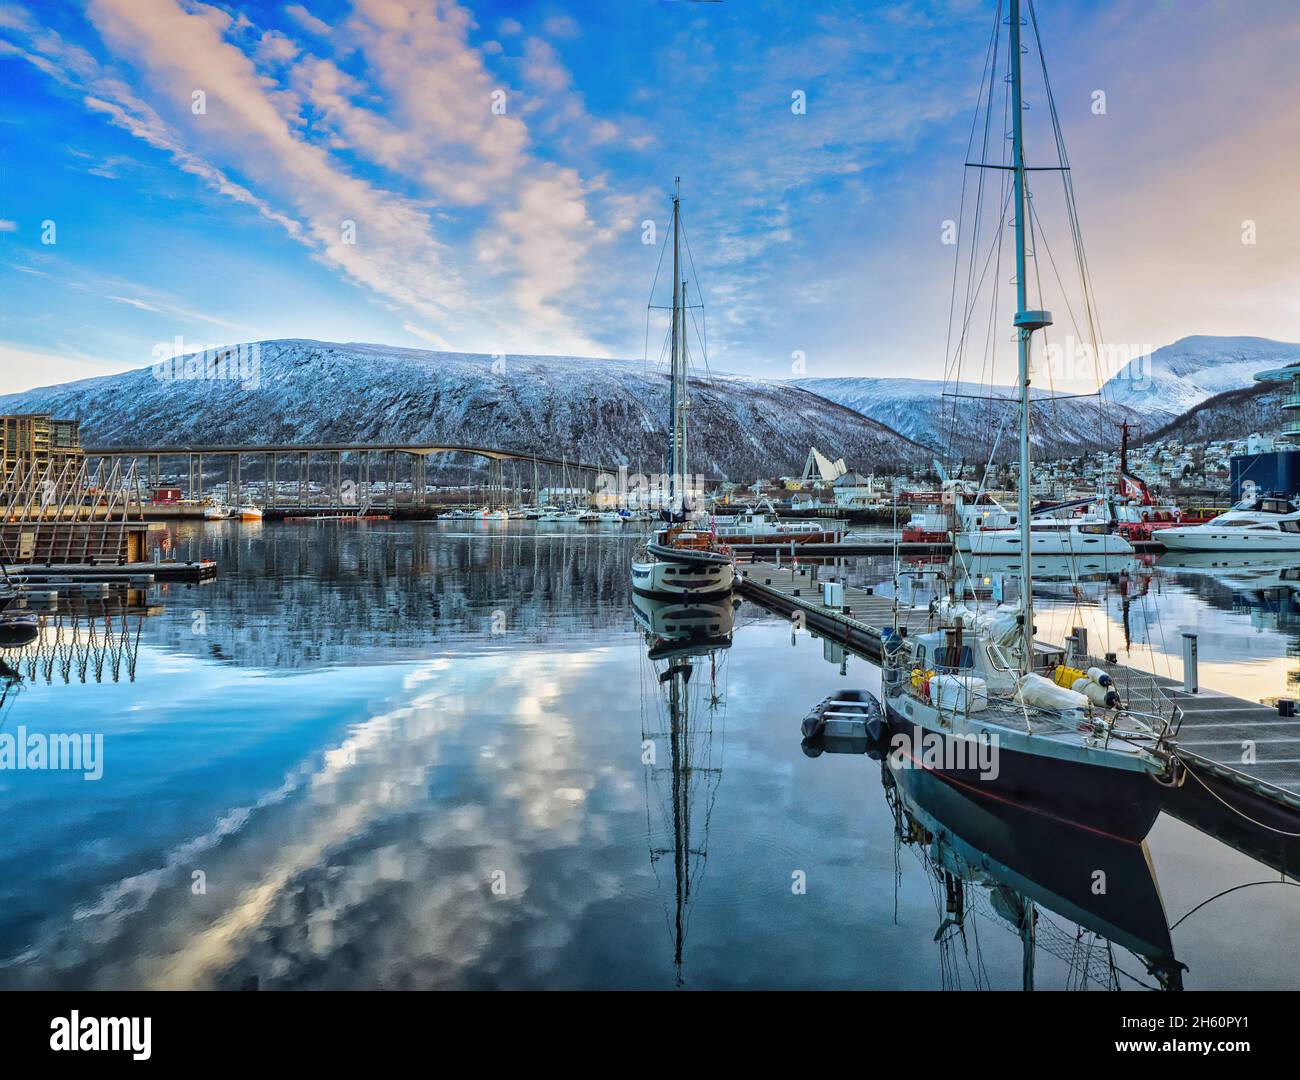 Looking across the harbour in Tromso towards Tromsdalen, with Tromso Bridge and the iconic Arctic Cathedral forming the backdrop. Stock Photo